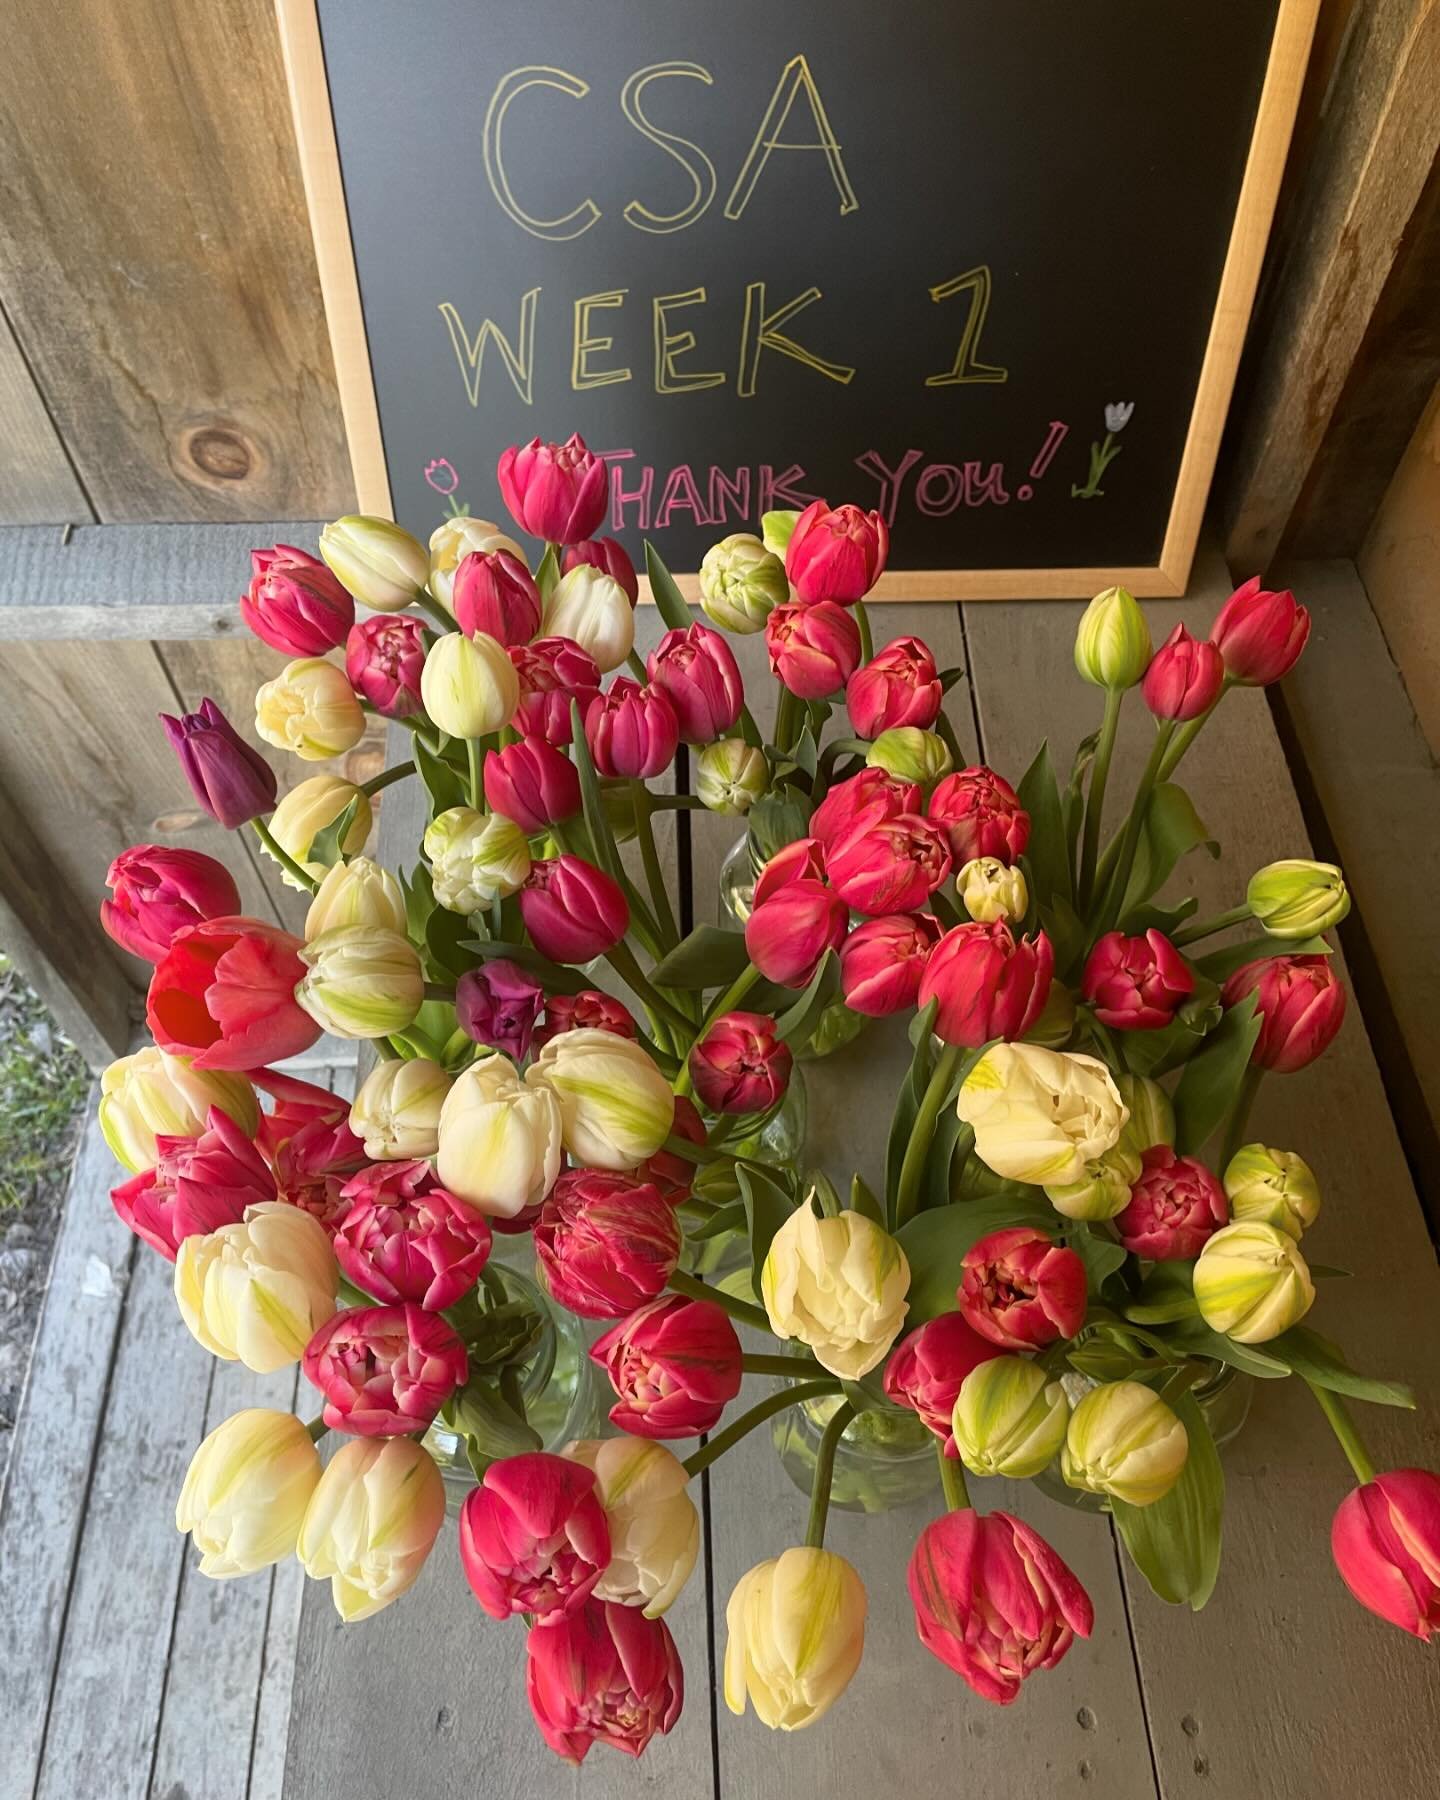 The first CSA pick up is today! The tulips are gorgeous 🌷 More colors and varieties in the weeks to come 🌷